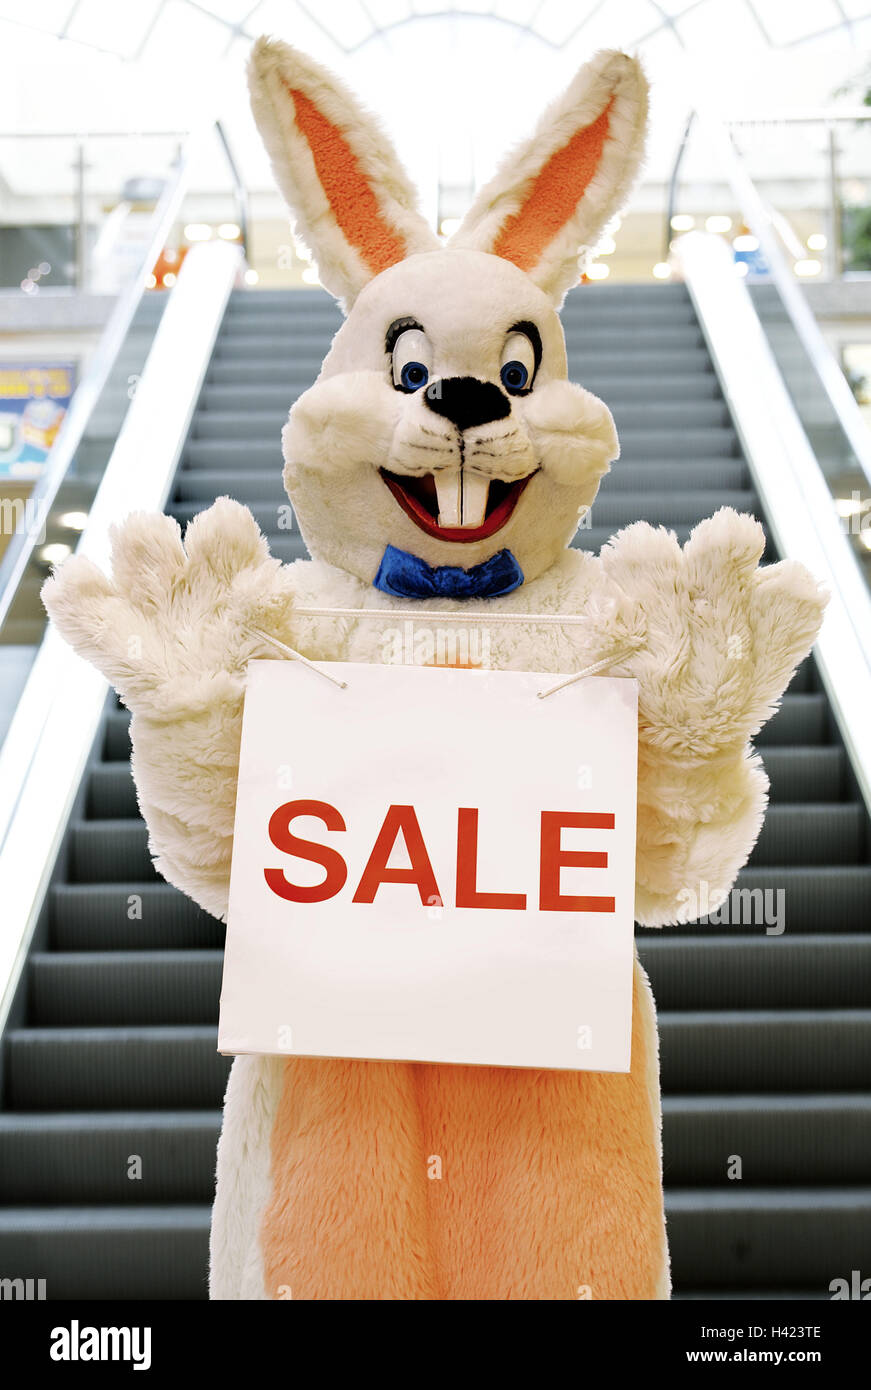 Department store, stairs, Easter bunny, carrier bag, label 'SALE' Easter, Easter feast, child's faith, lining, panels, costume, hare's costume, hare, humor, fun, funnily, friendly, happy, joy, inside, purchasing, Easter purchasing, bargain purchase, offer Stock Photo